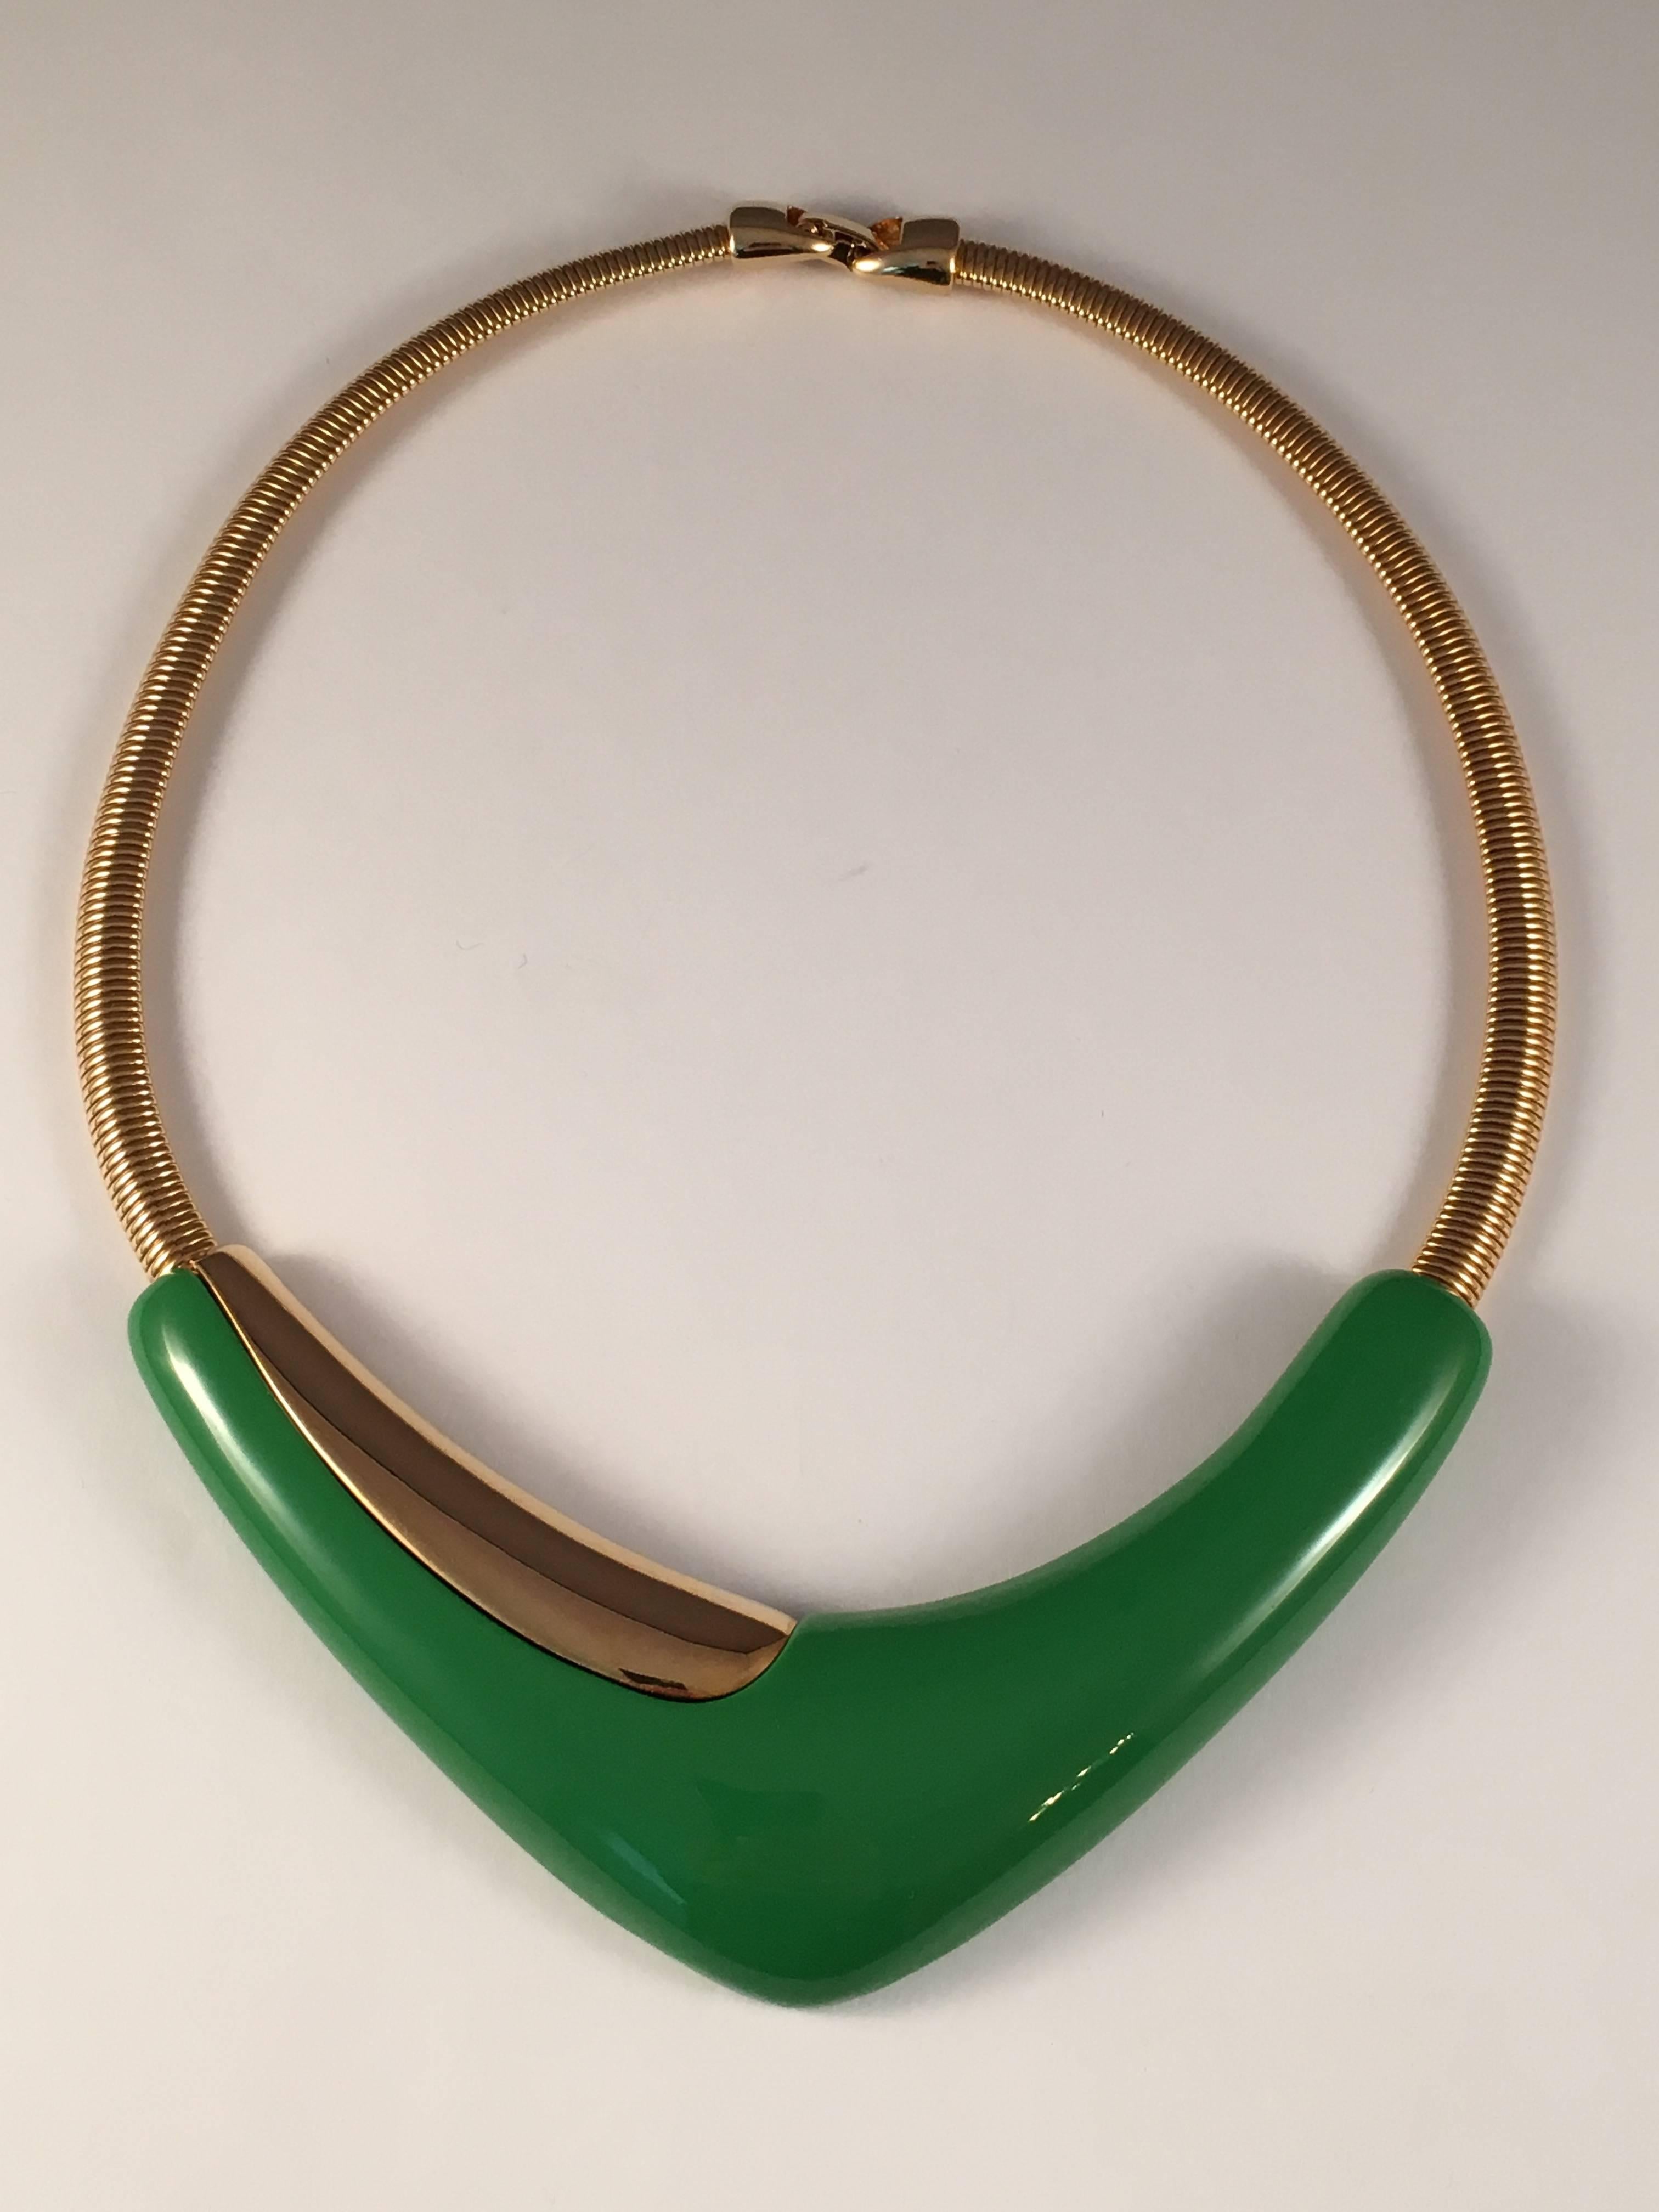 This is a late 1970s Monet necklace in the modernist style. It has an inner circumference of 16 1/2